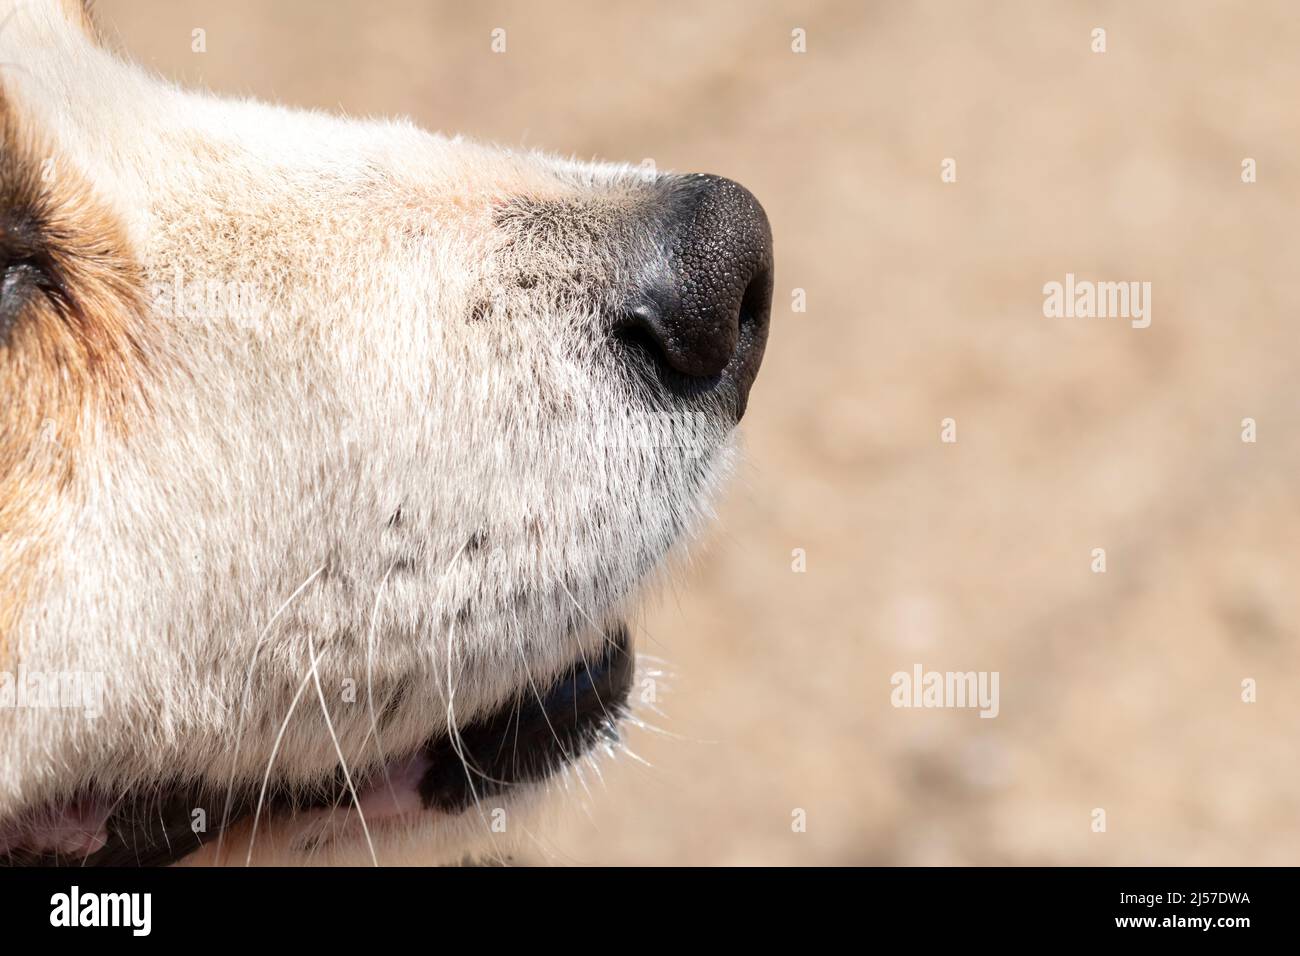 Close-up shot of a dog's snout showing plenty of details Stock Photo